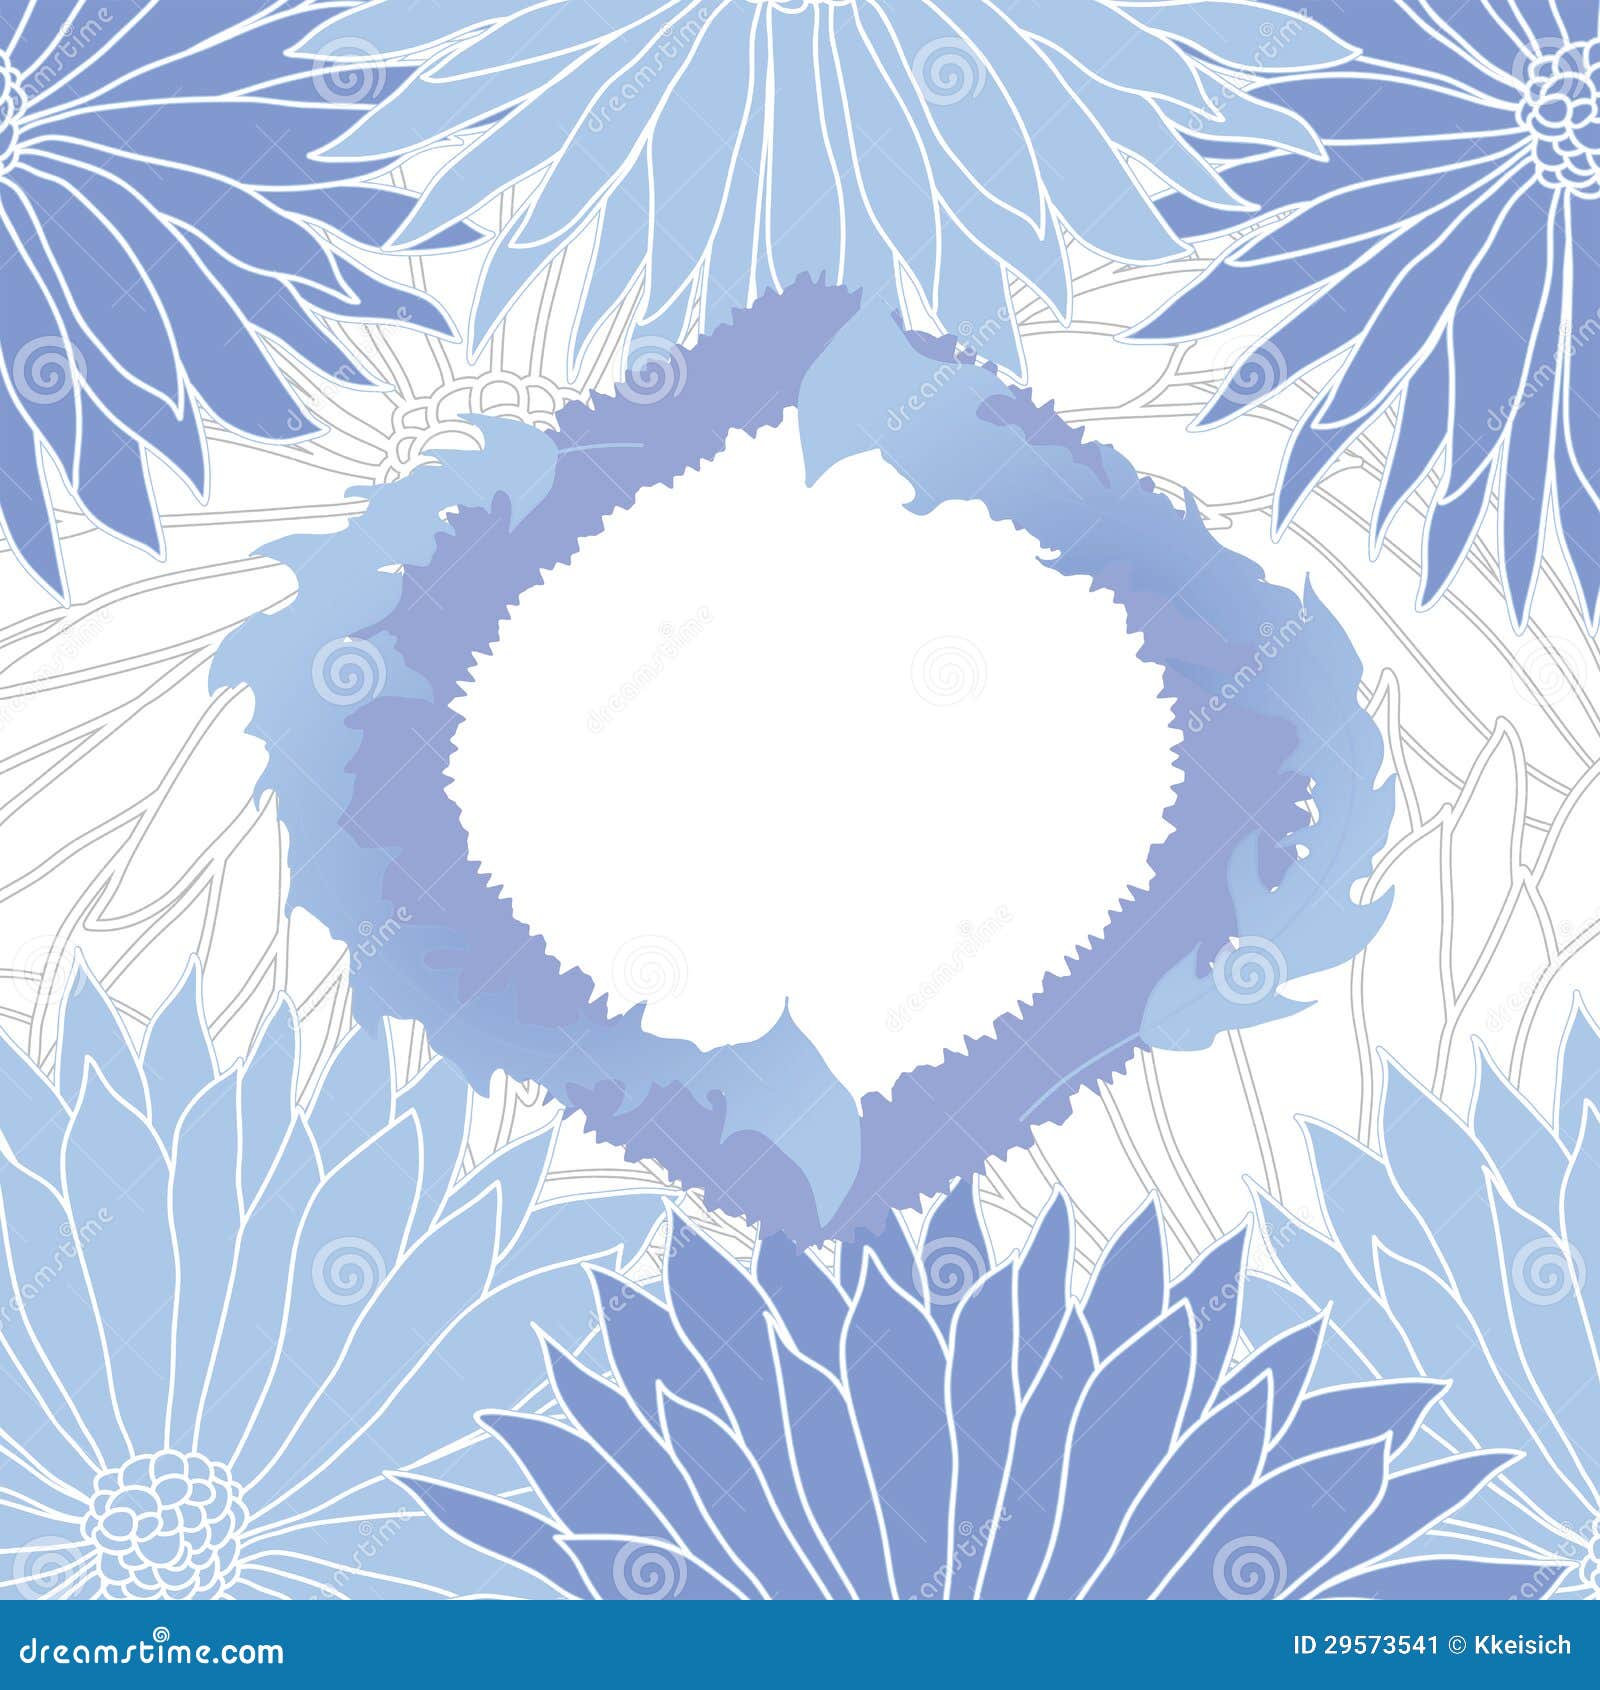 Blue flower background stock vector. Illustration of beautiful - 29573541